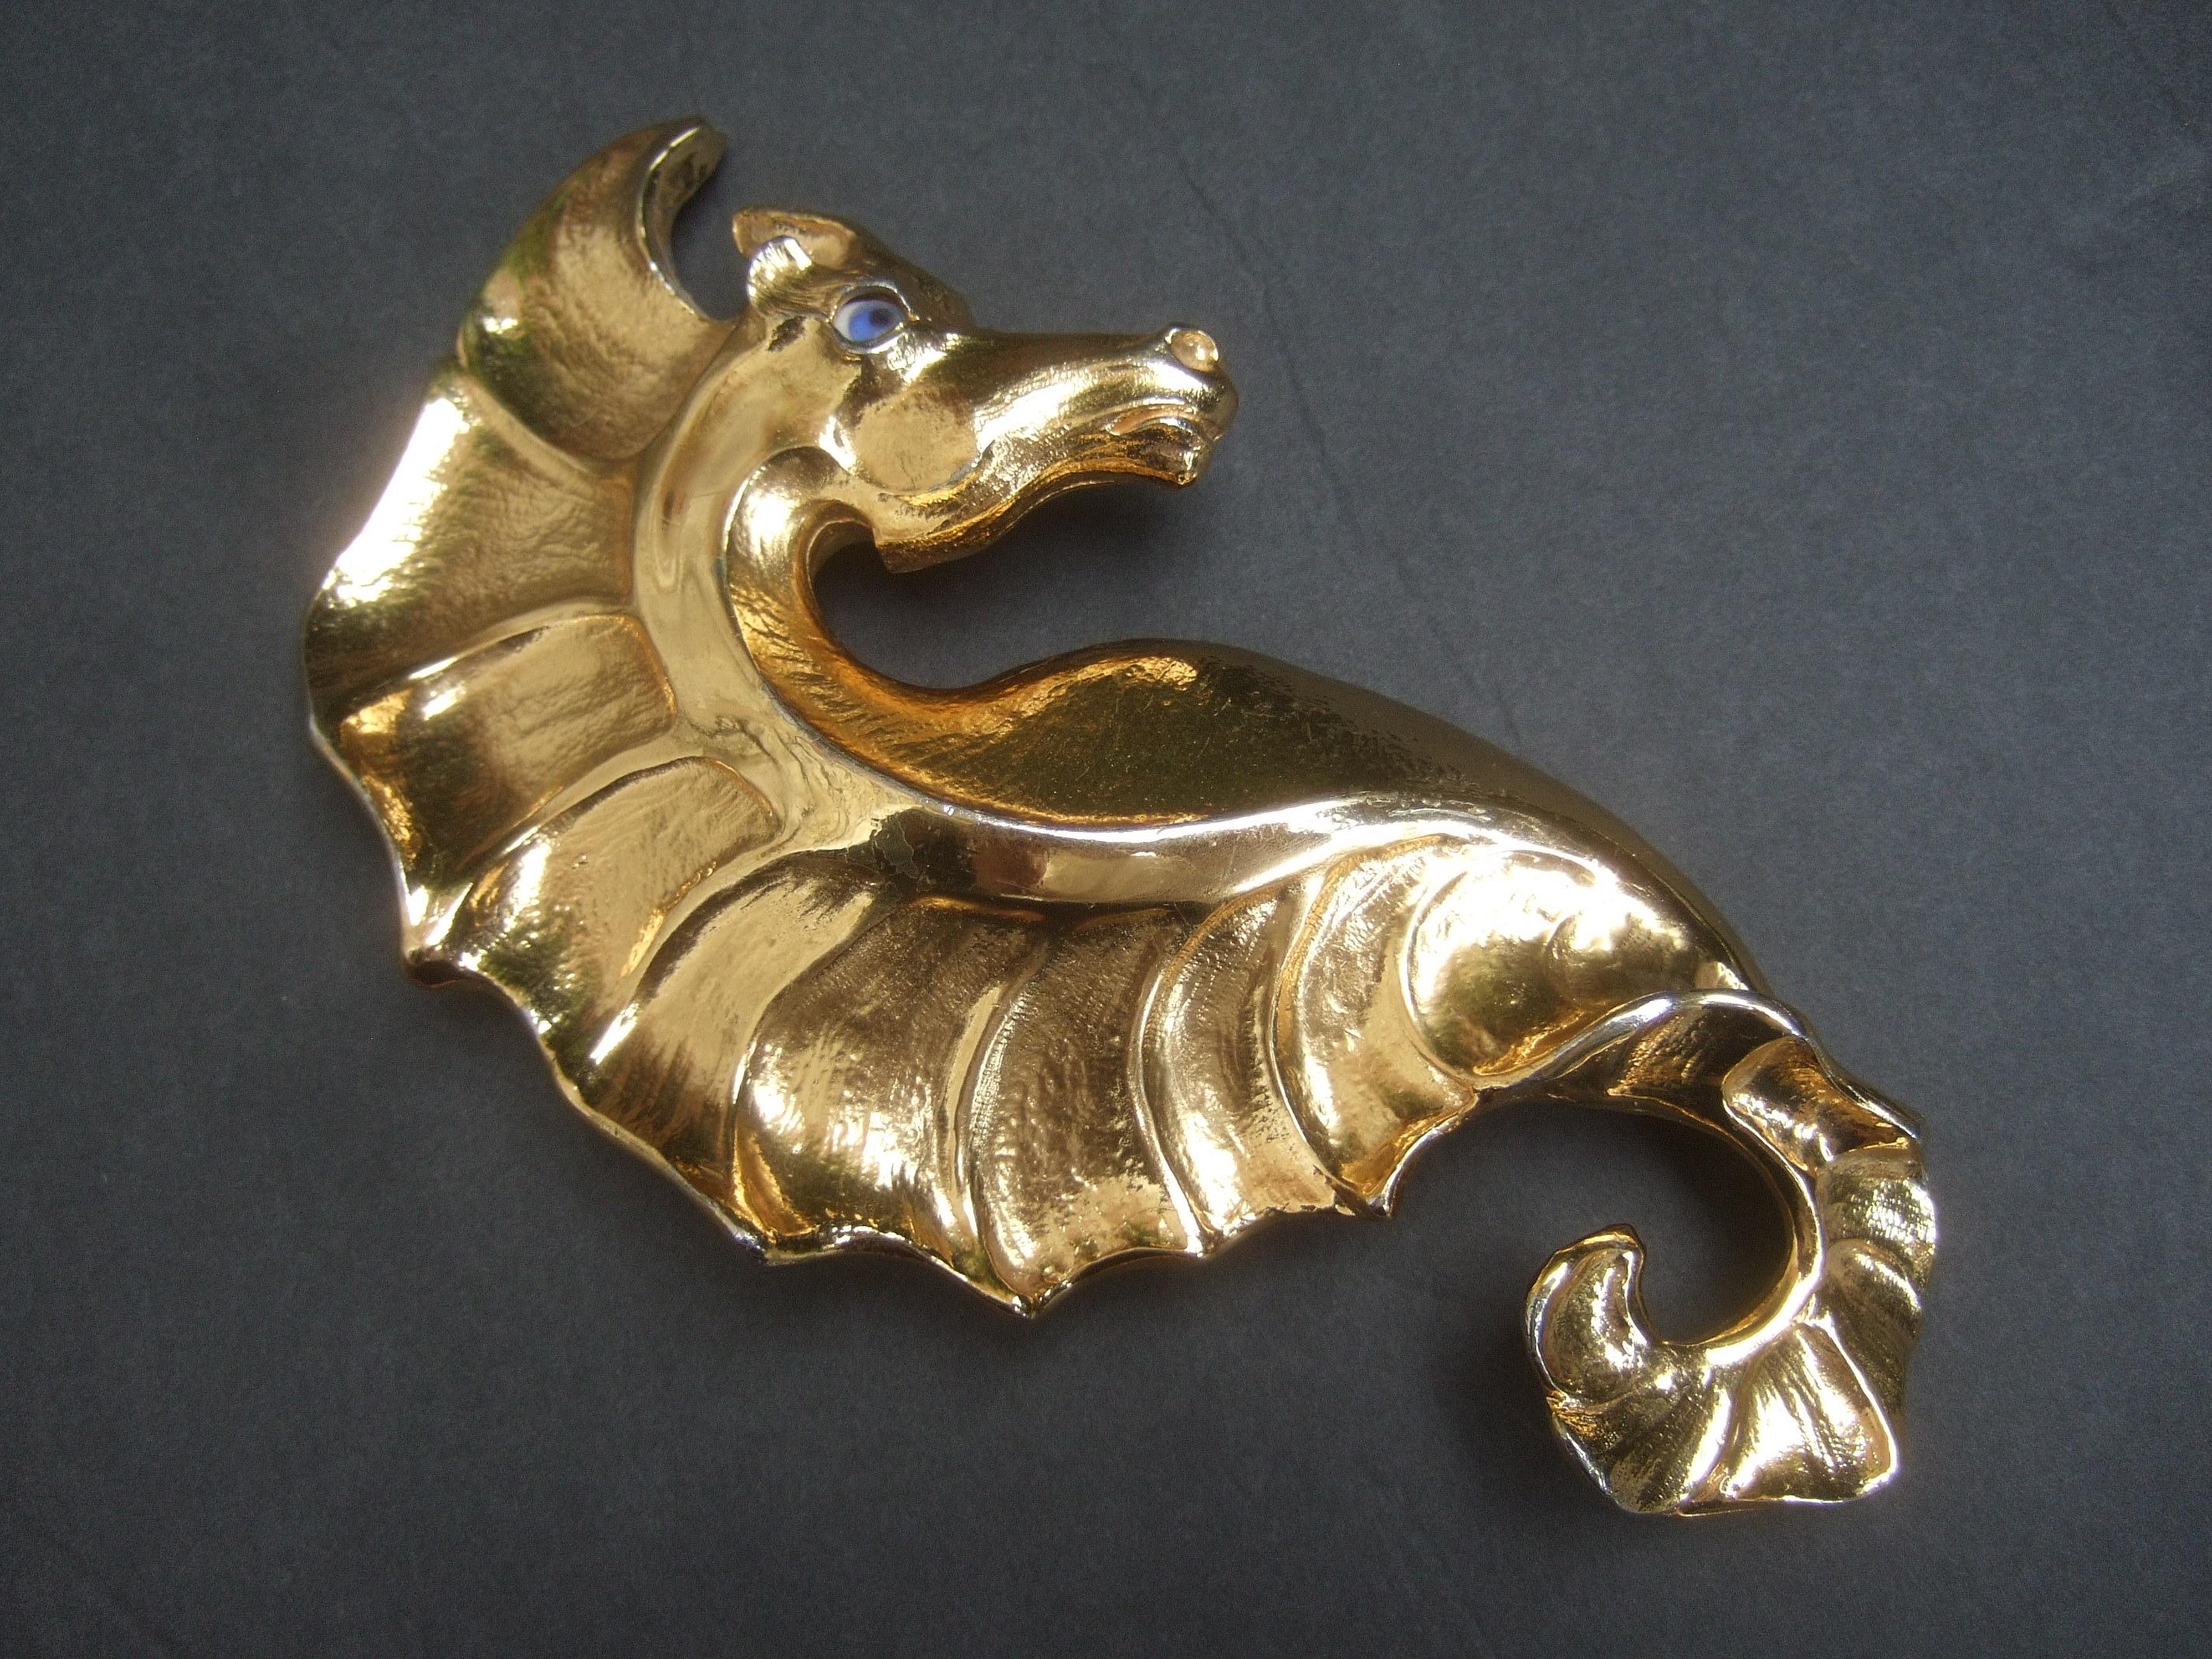 Christopher Ross Rare Massive 24k Gold Plated Seahorse Belt Buckle c 1980s For Sale 1